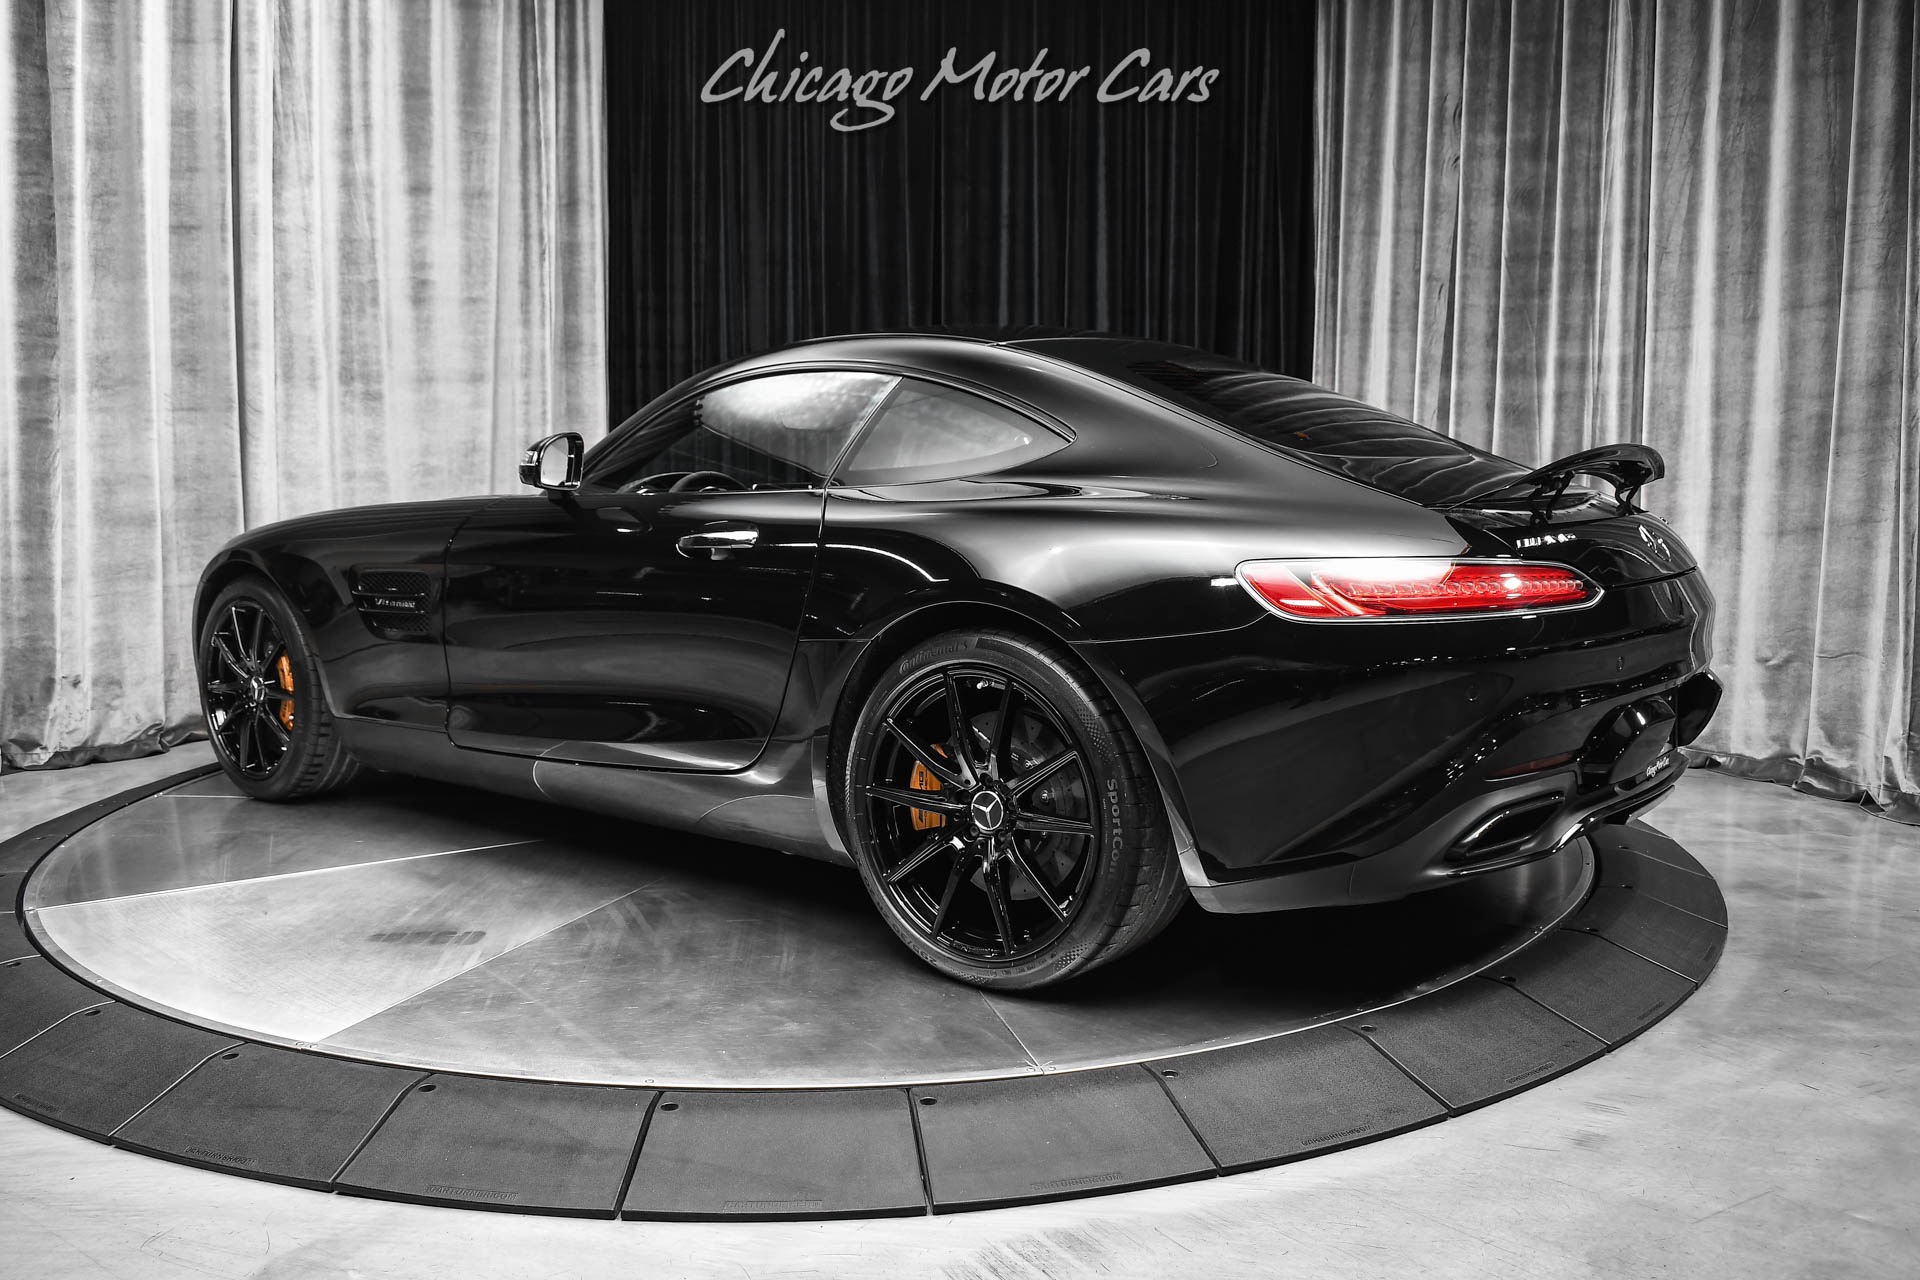 Used-2016-Mercedes-Benz-AMG-GT-S-Coupe-RARE-Carbon-Ceramic-Brakes-Burmester-High-End-AMG-Wheels